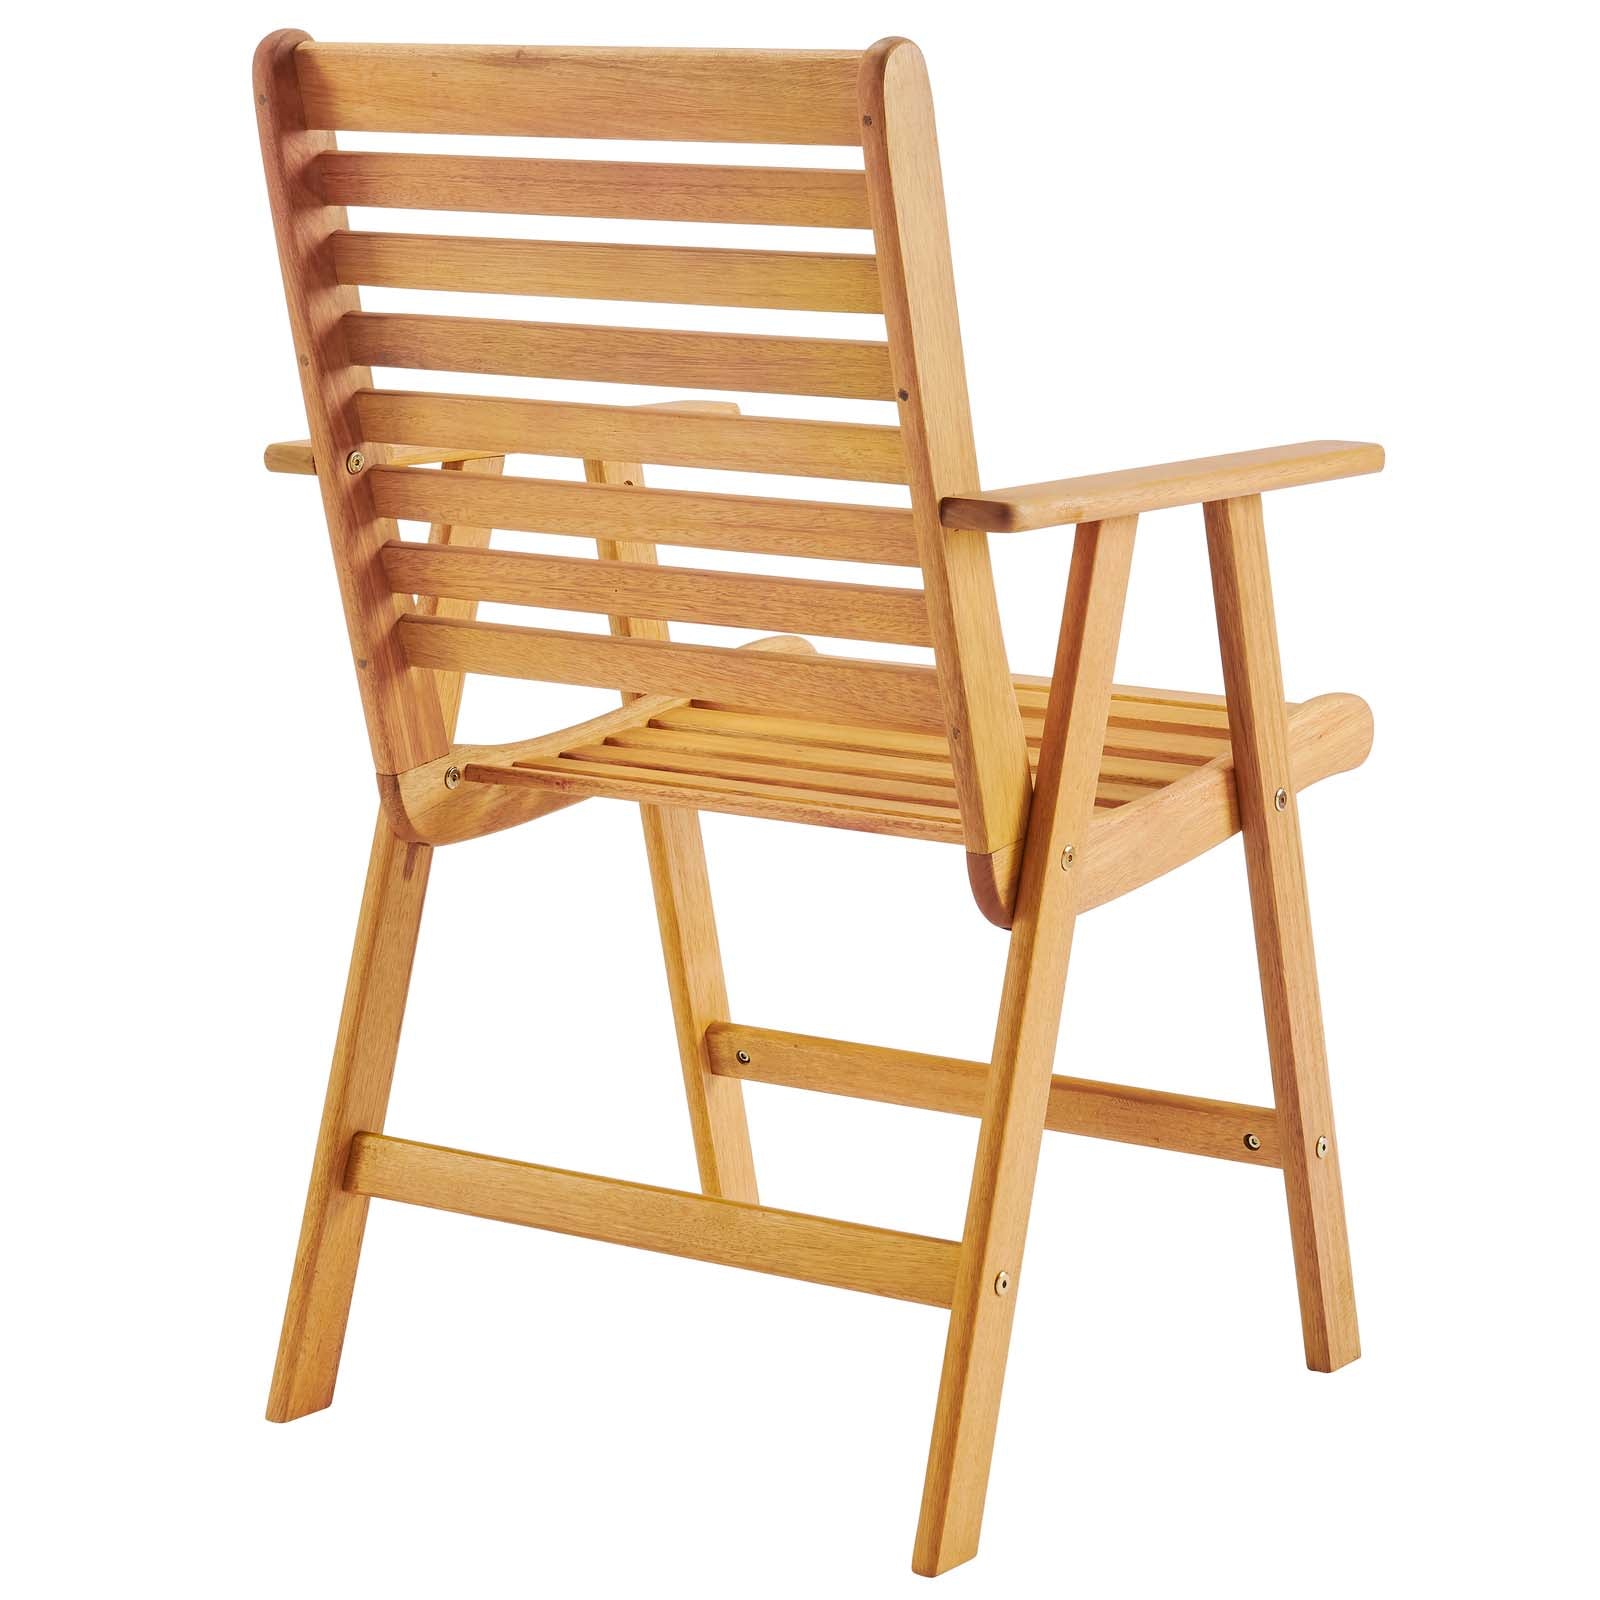 Hatteras Outdoor Patio Eucalyptus Wood Dining Armchair - East Shore Modern Home Furnishings